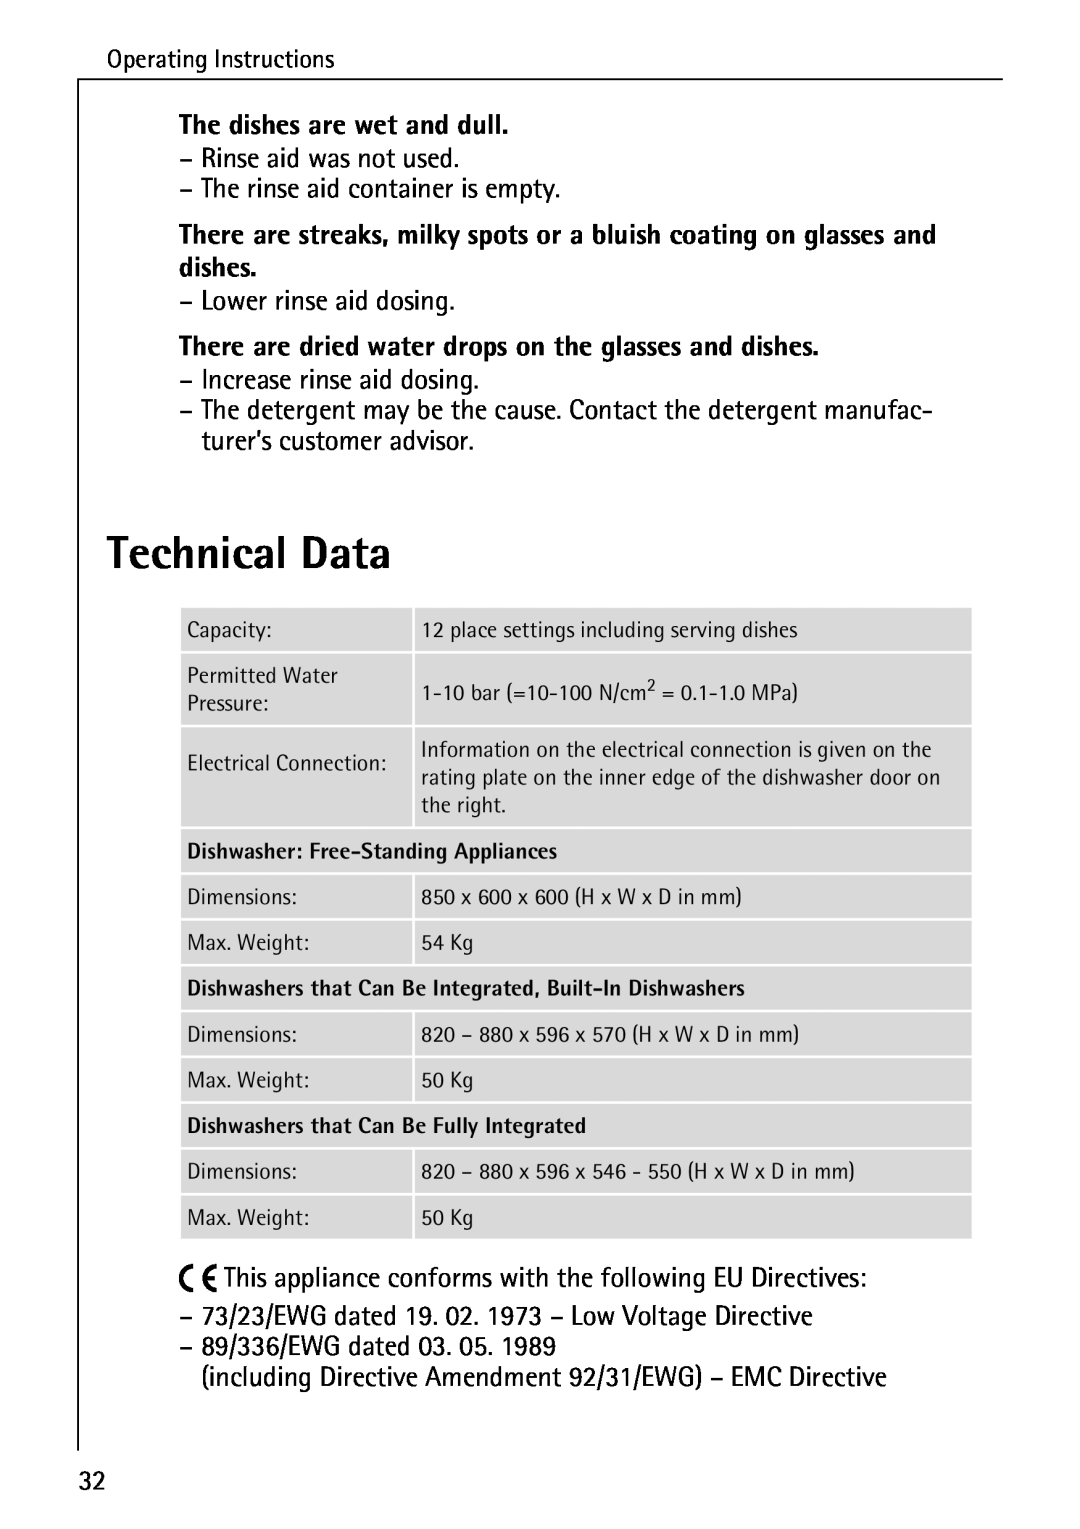 Electrolux 60820 manual Technical Data, The dishes are wet and dull, There are dried water drops on the glasses and dishes 